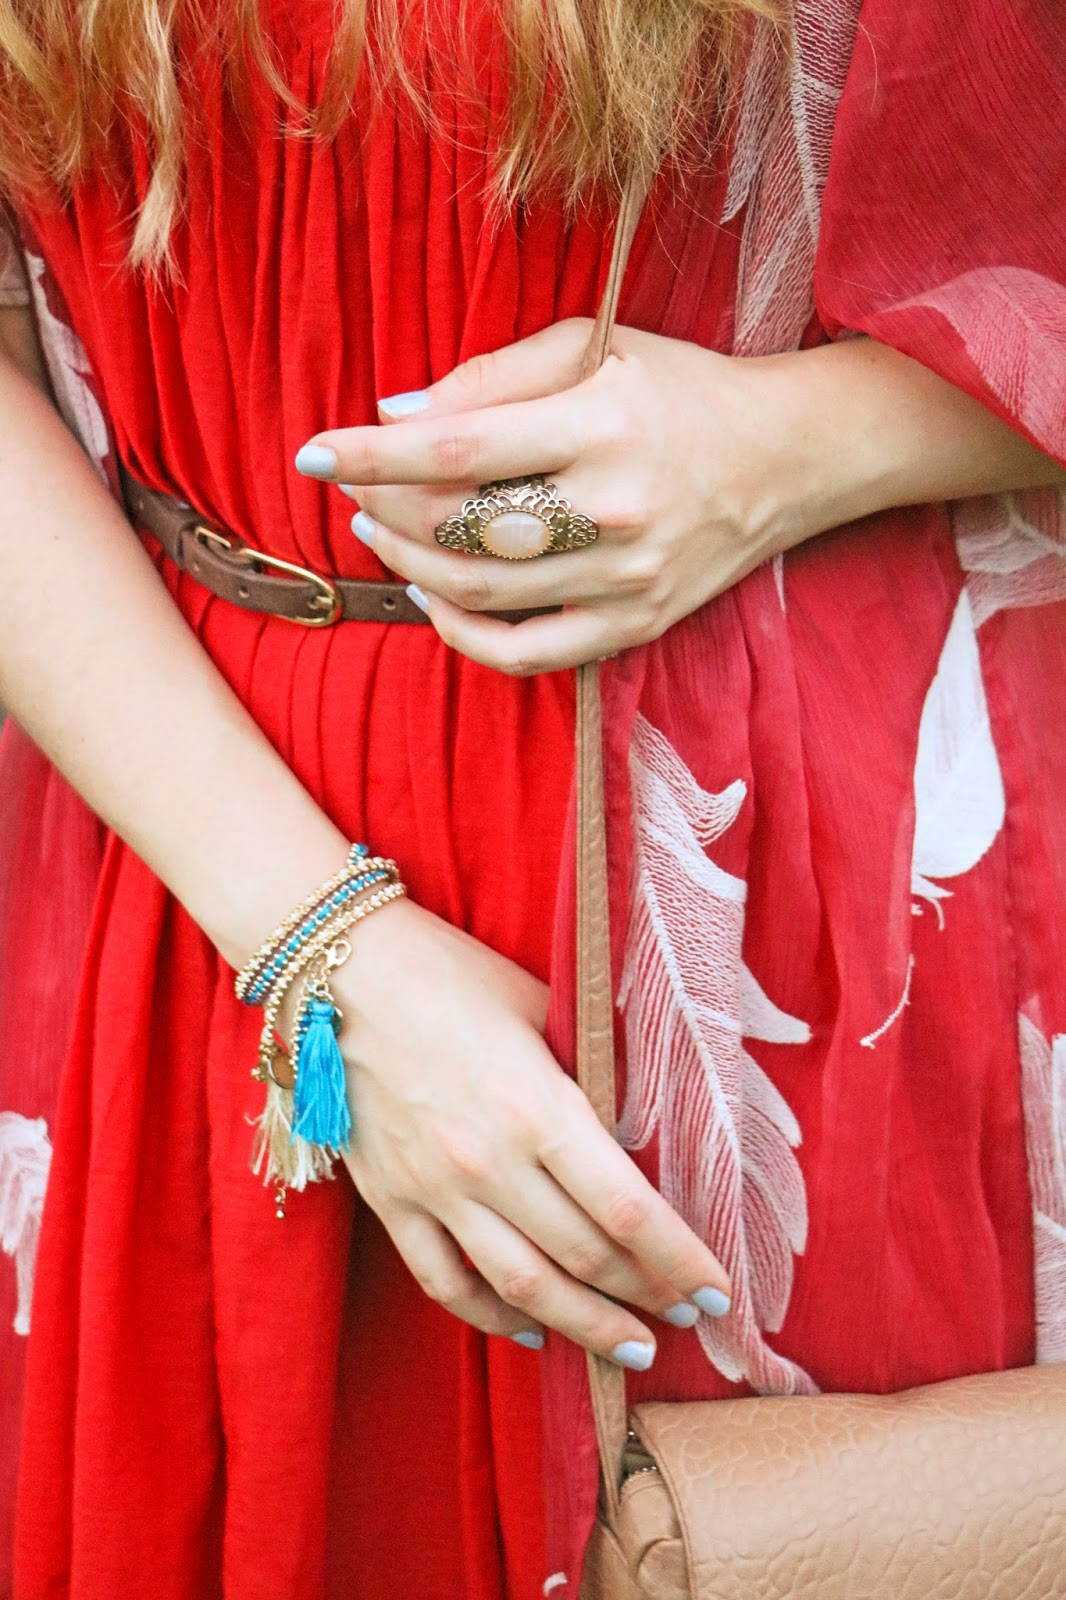 Loving these cute boho chic accessories